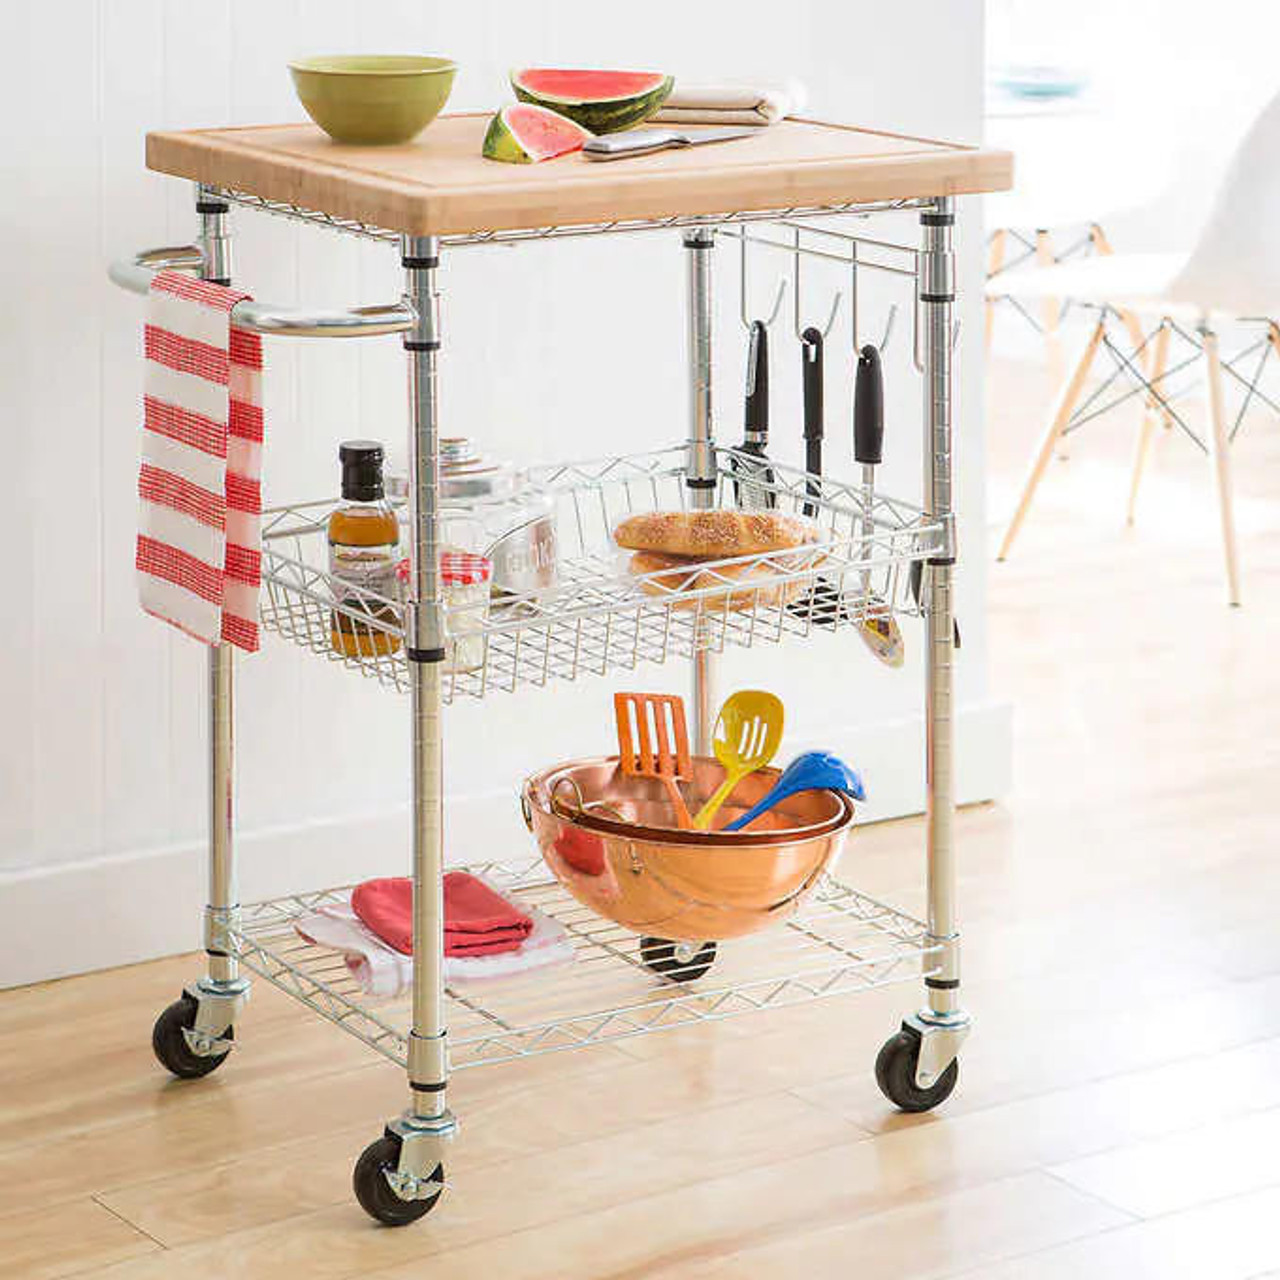 TRINITY EcoStorage Bamboo Kitchen Cart - Enhance Your Culinary Space with Style
- Chicken Pieces